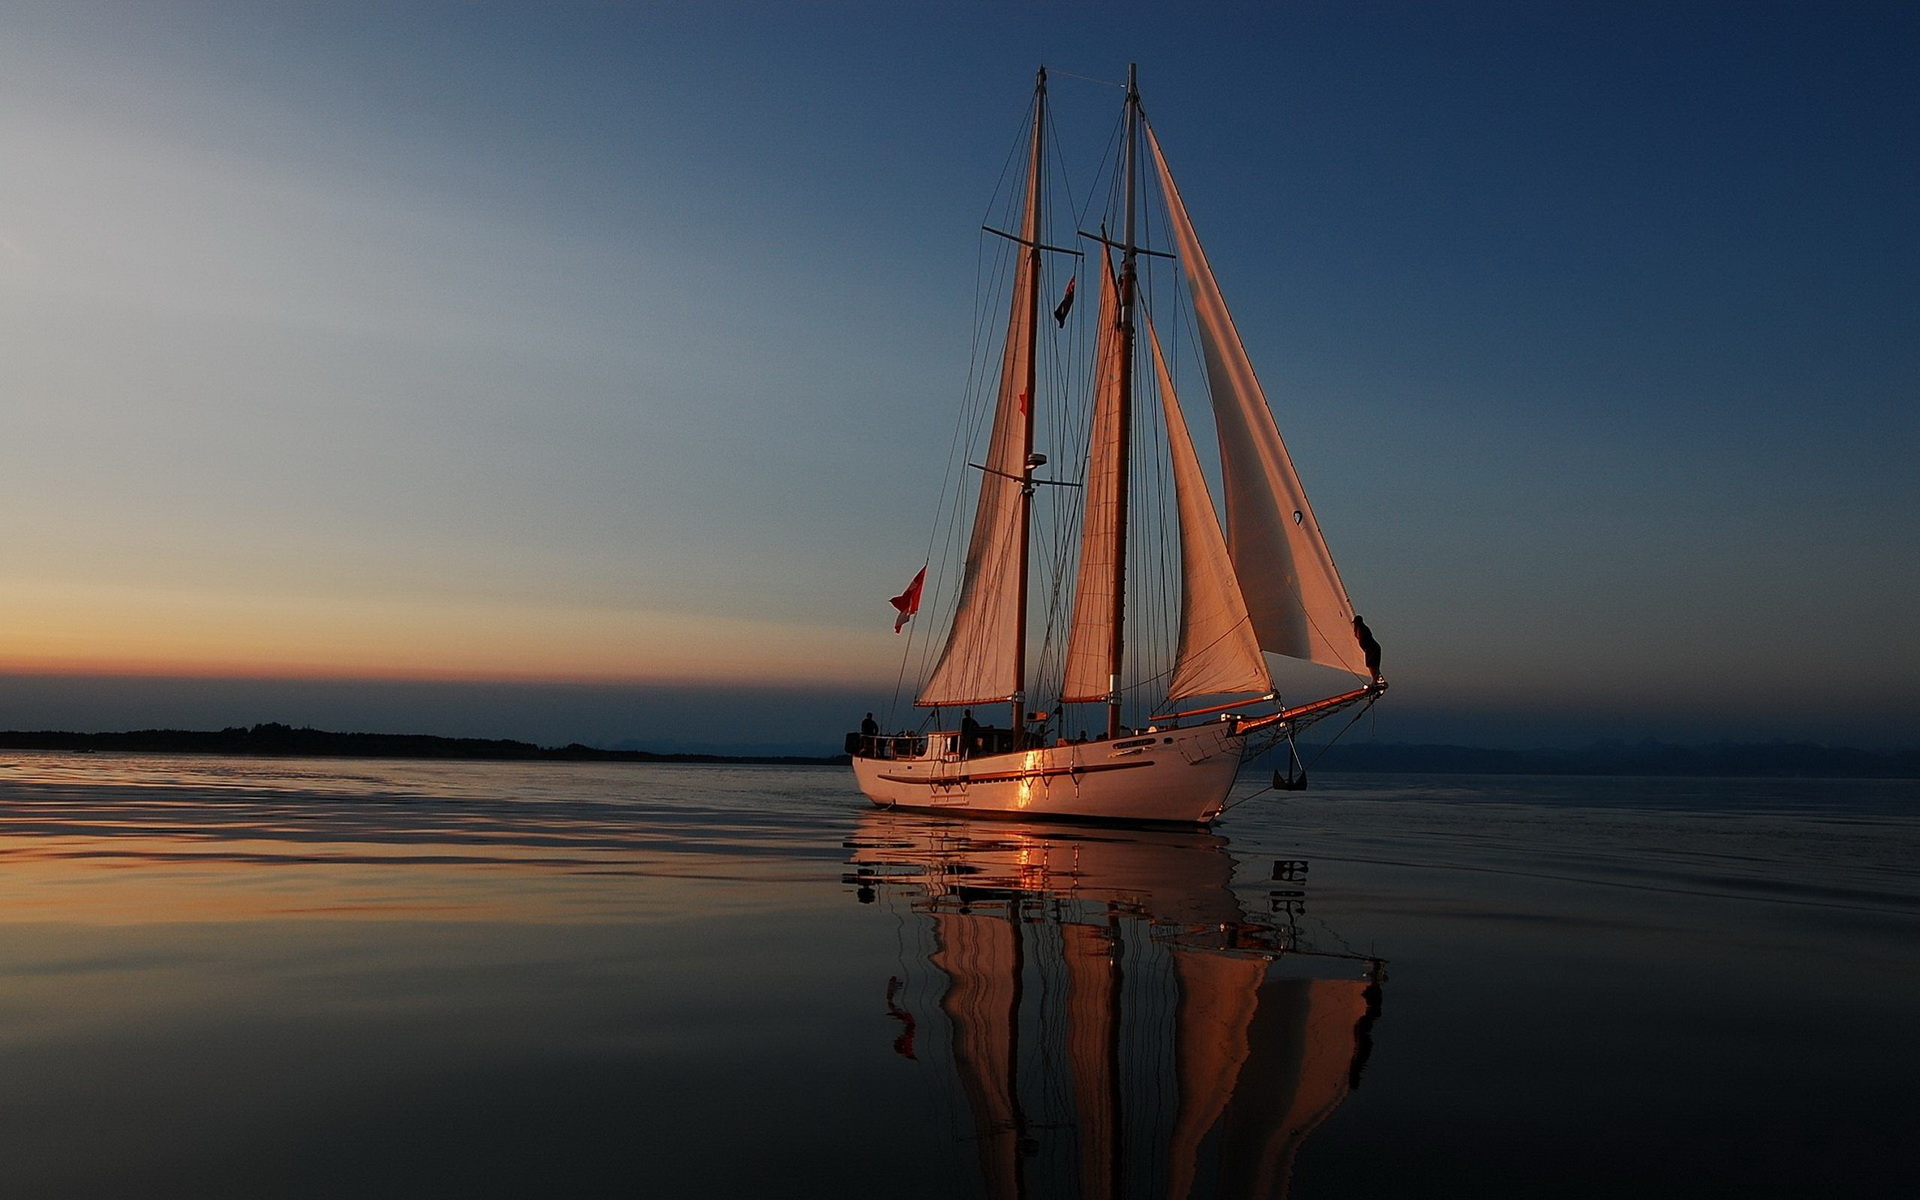 Schooner: Sailboat with a foremast and a mainmast stepped nearly amidships. 1920x1200 HD Wallpaper.